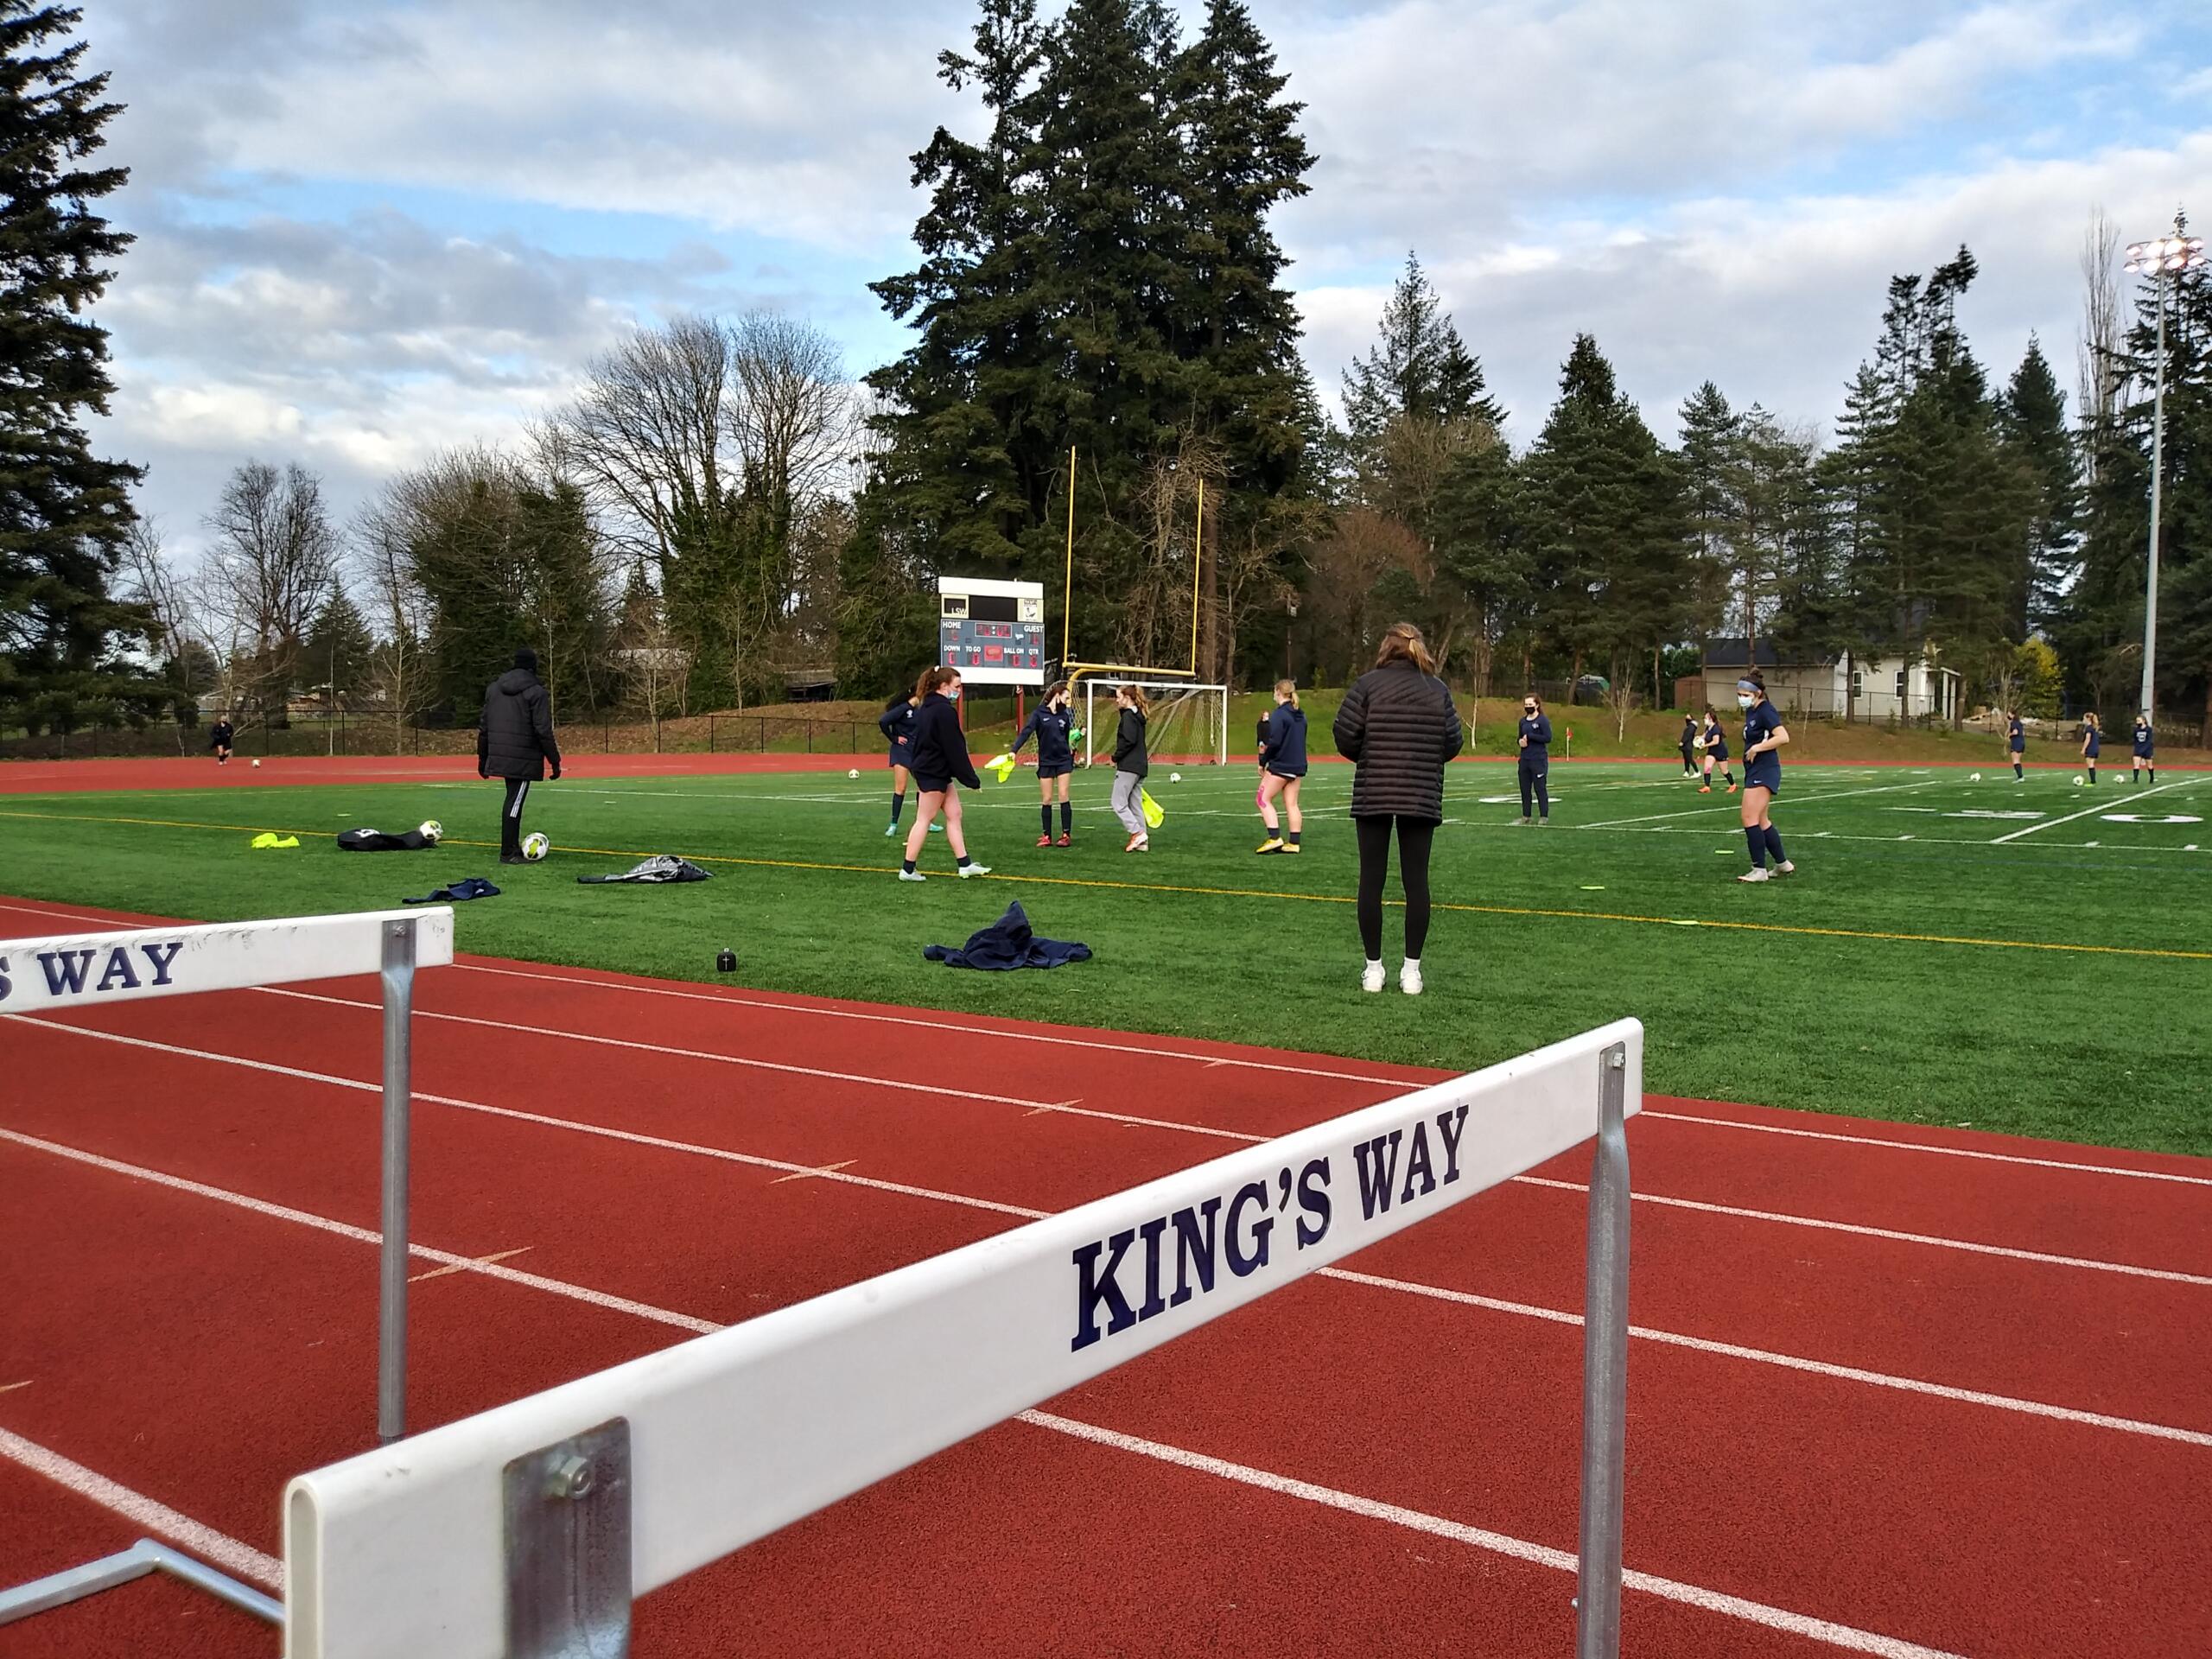 The King's Way Christian girls soccer team warms up prior to their 1A district soccer playoff match against Hoquiam on Monday, March 15, 2021 (Tim Martinez/The Columbian)